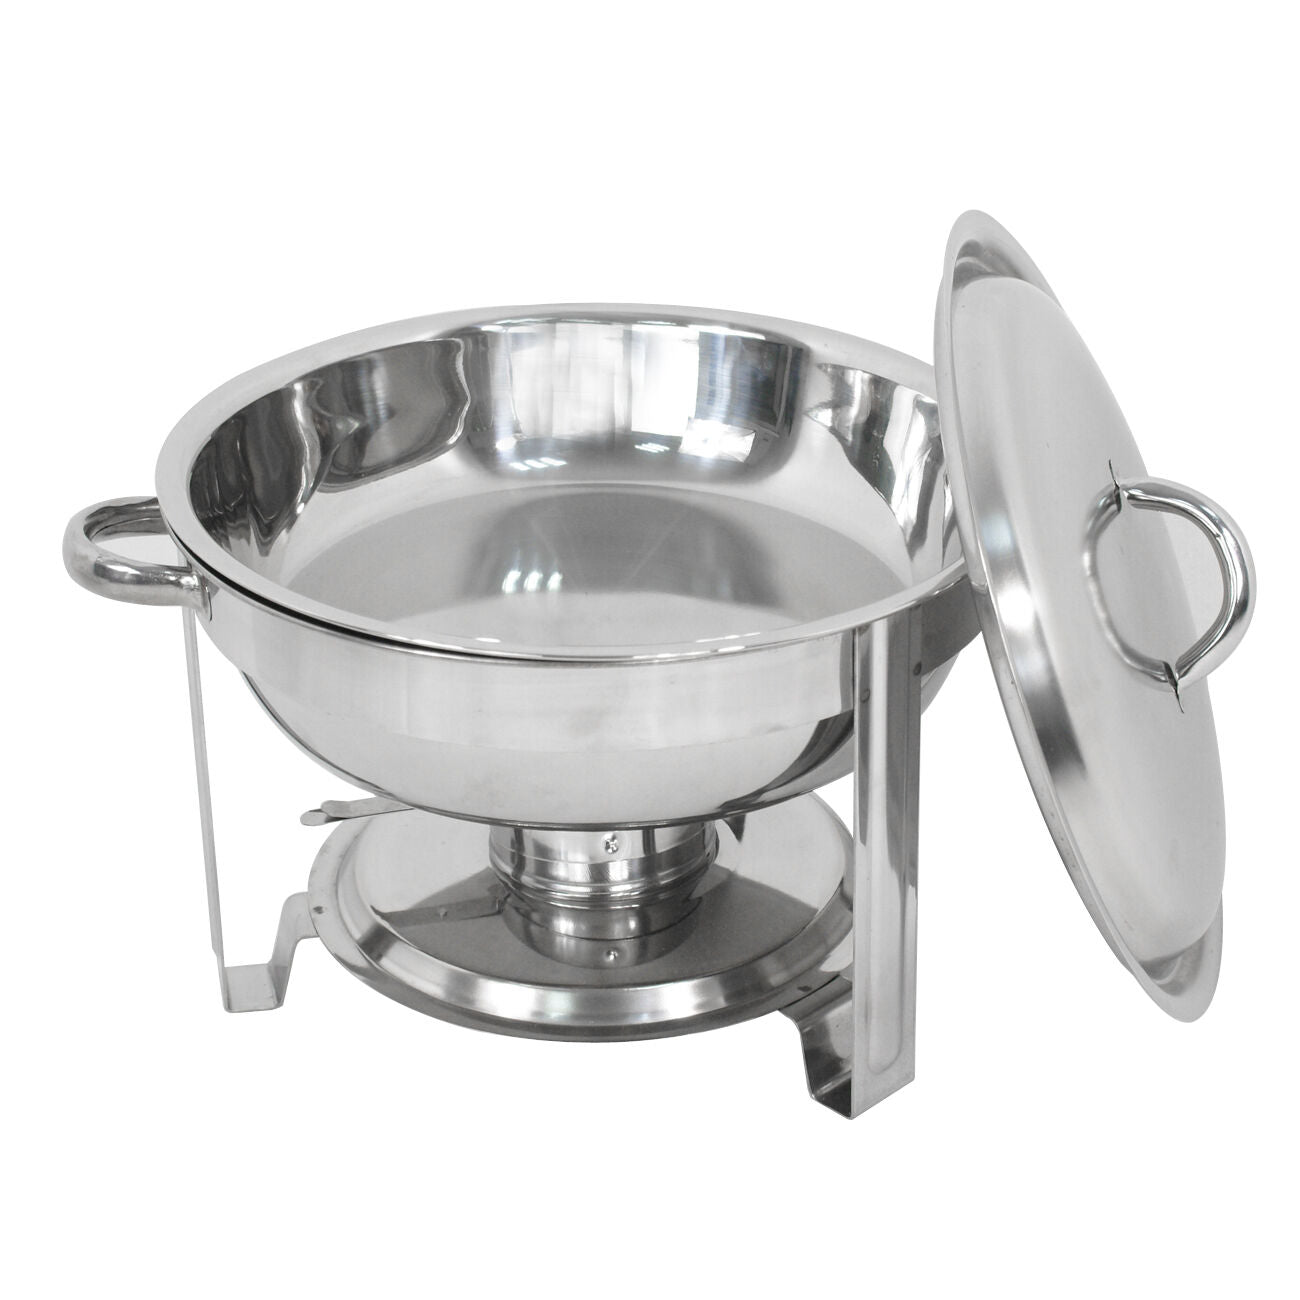 5-Pack Round Chafing Dish Buffet Chafer Warmer Set w/Lid 5 Quart,Stainless Steel